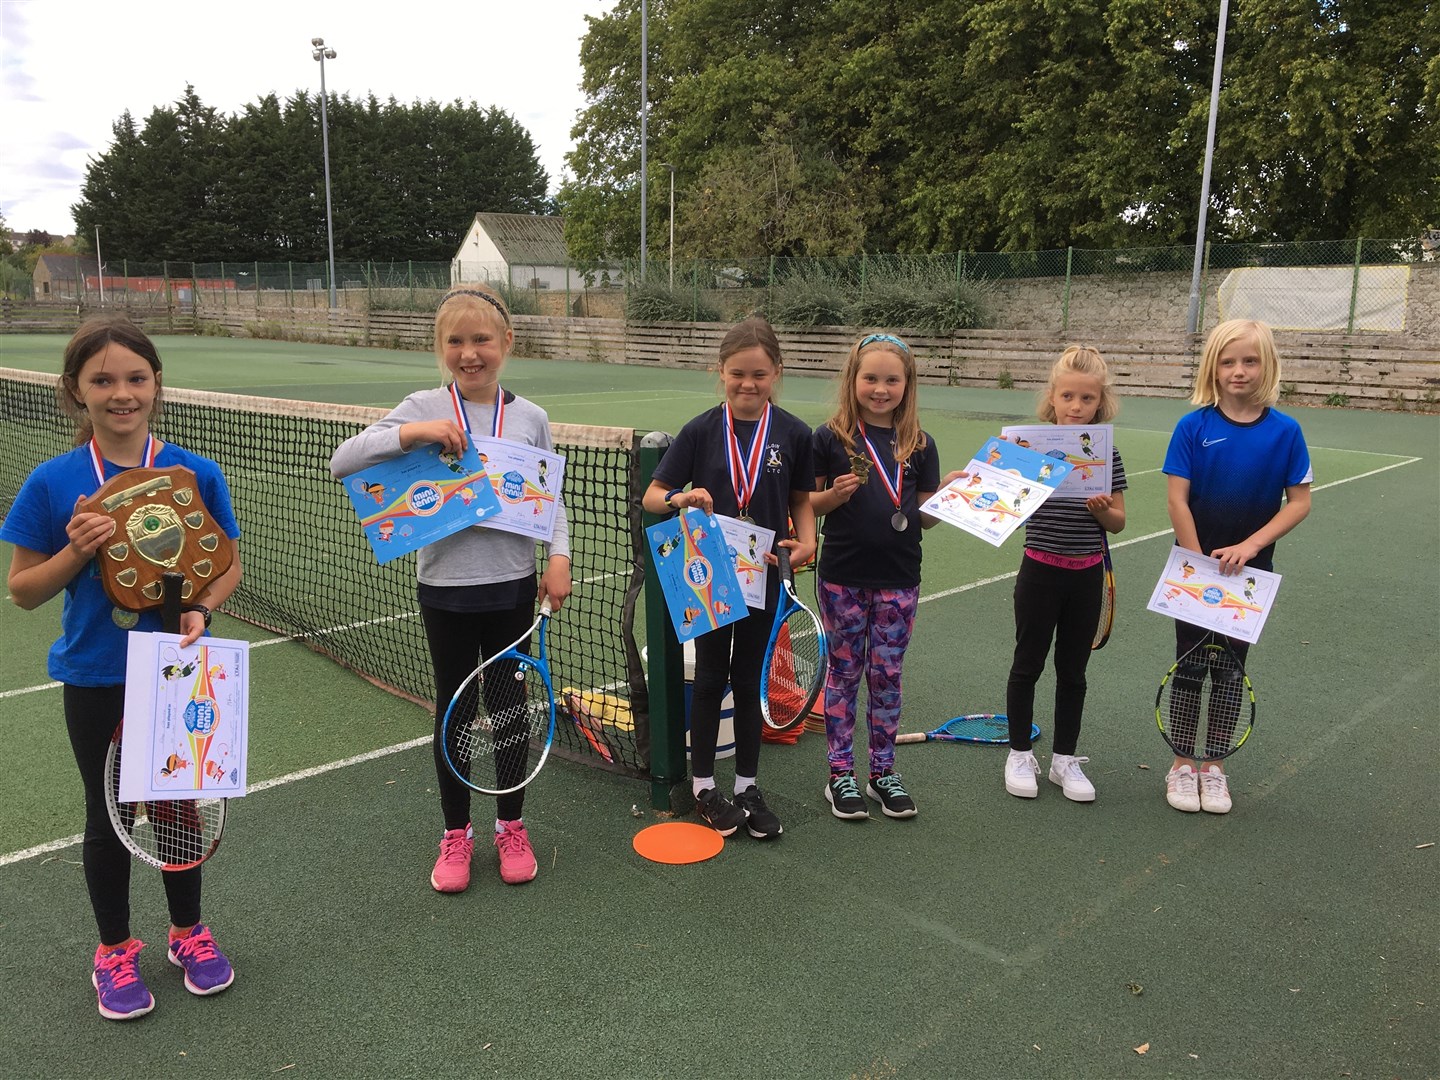 Some of the 9-and-under girls competitors including winner Rose Christie (far left), equal second-placed Ellie Hommel, Isla Johnston, and Eilidh Anderson.